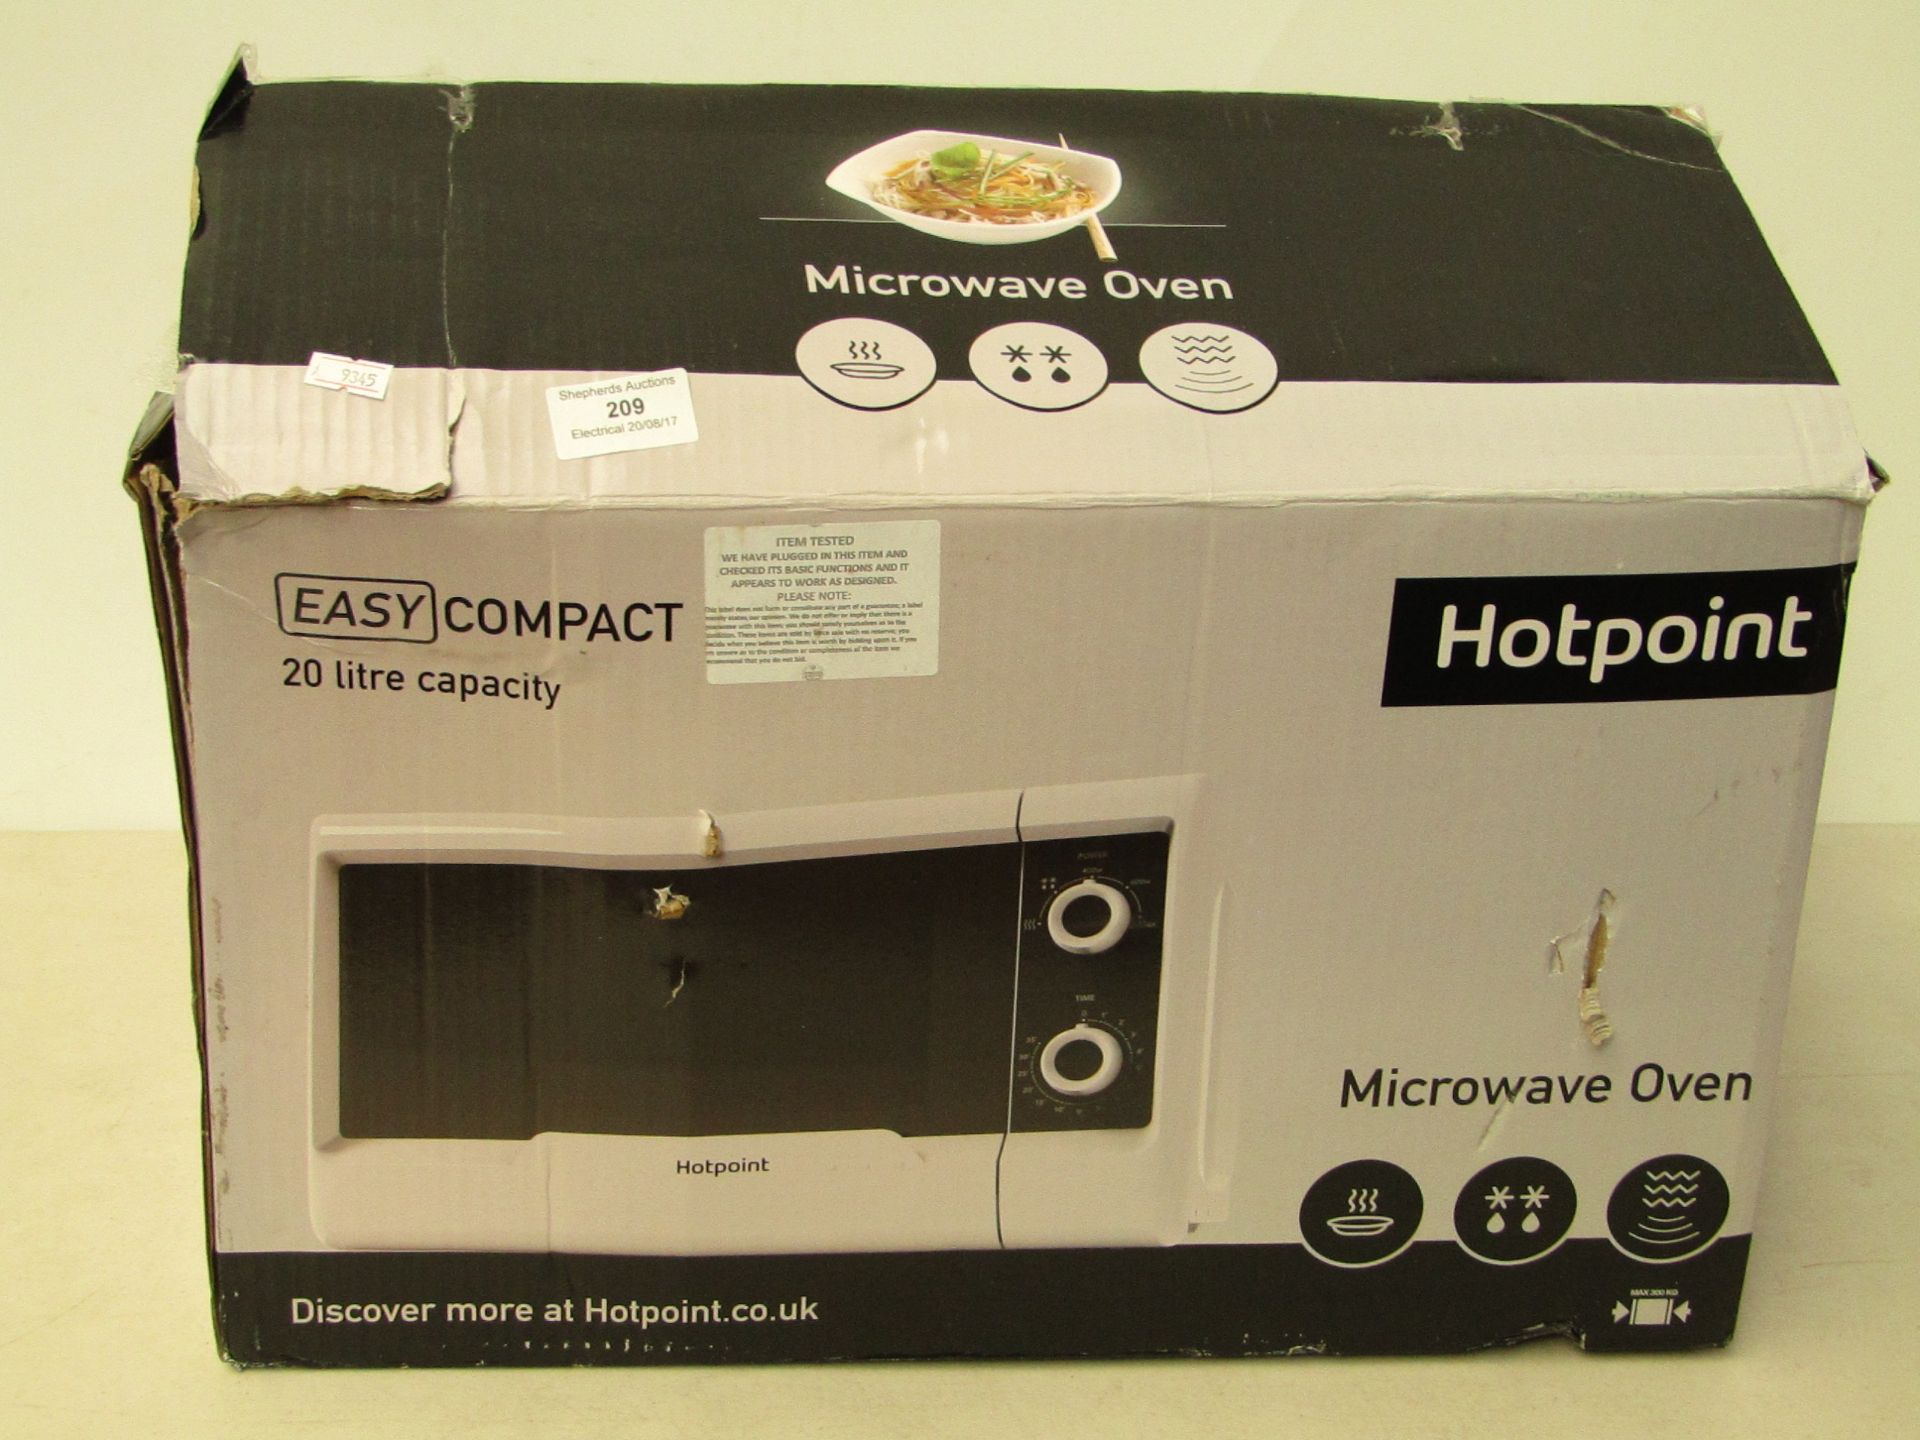 Hotpoint Easy Compact 20L microwave oven, tested working and boxed.